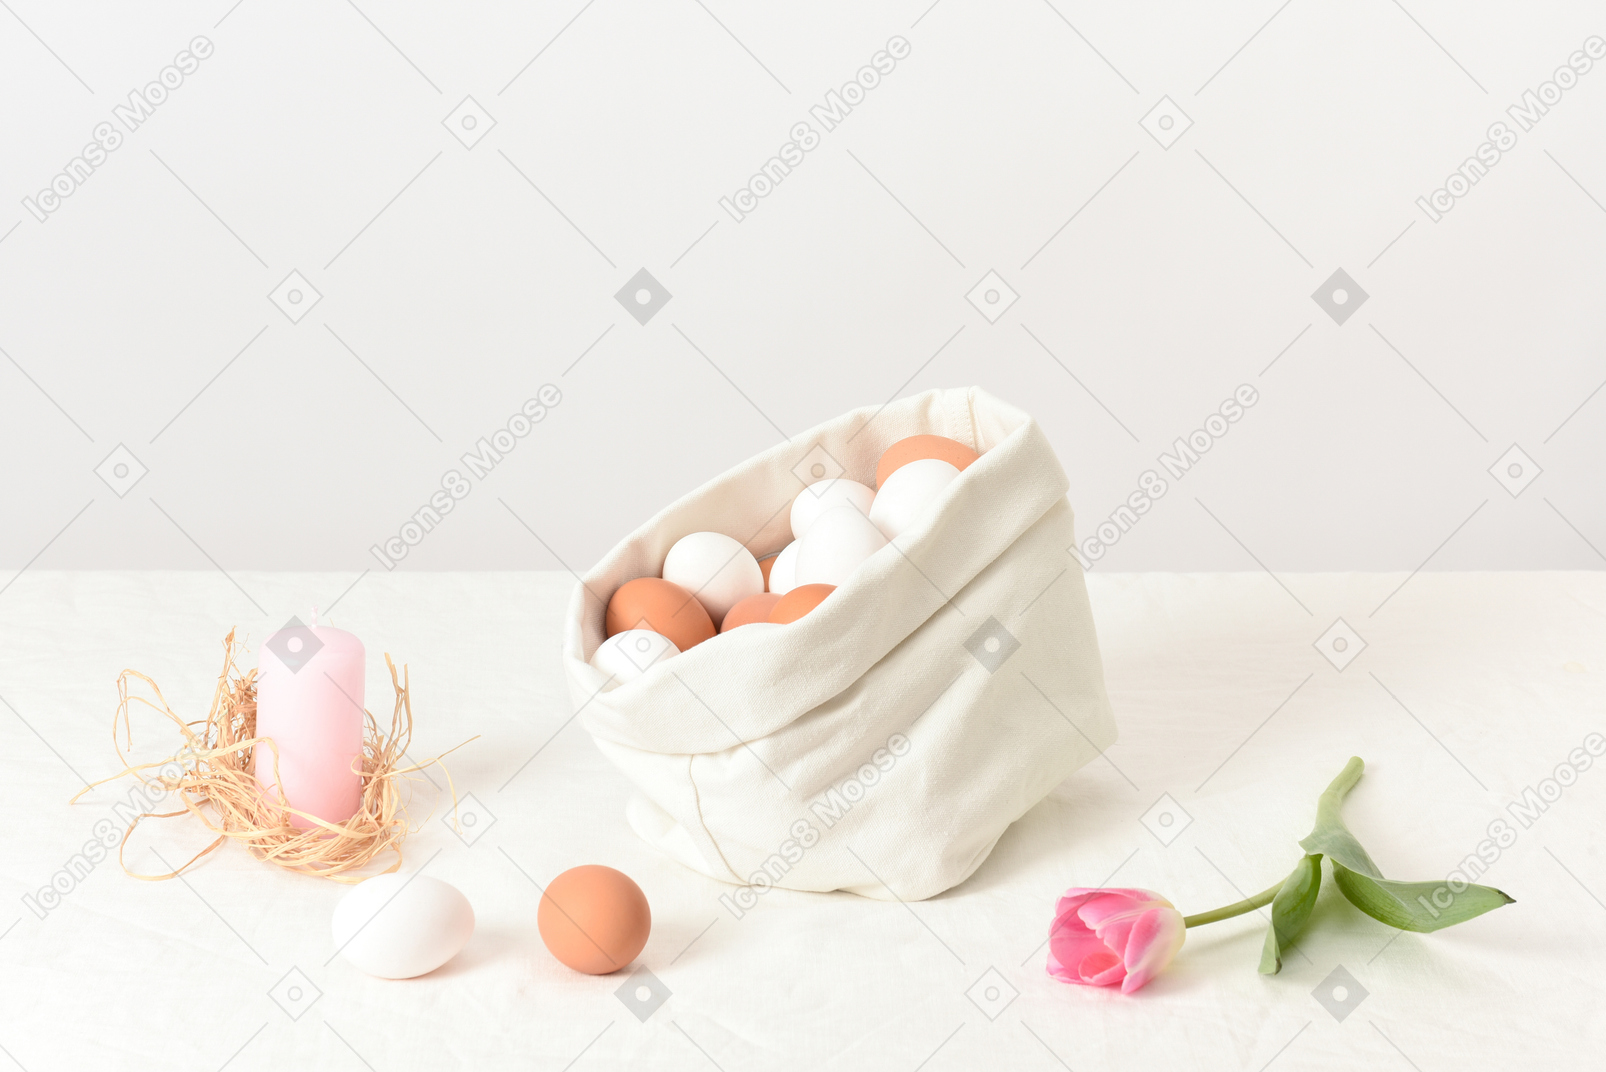 Linen bag with some eggs, a candle and a tulip